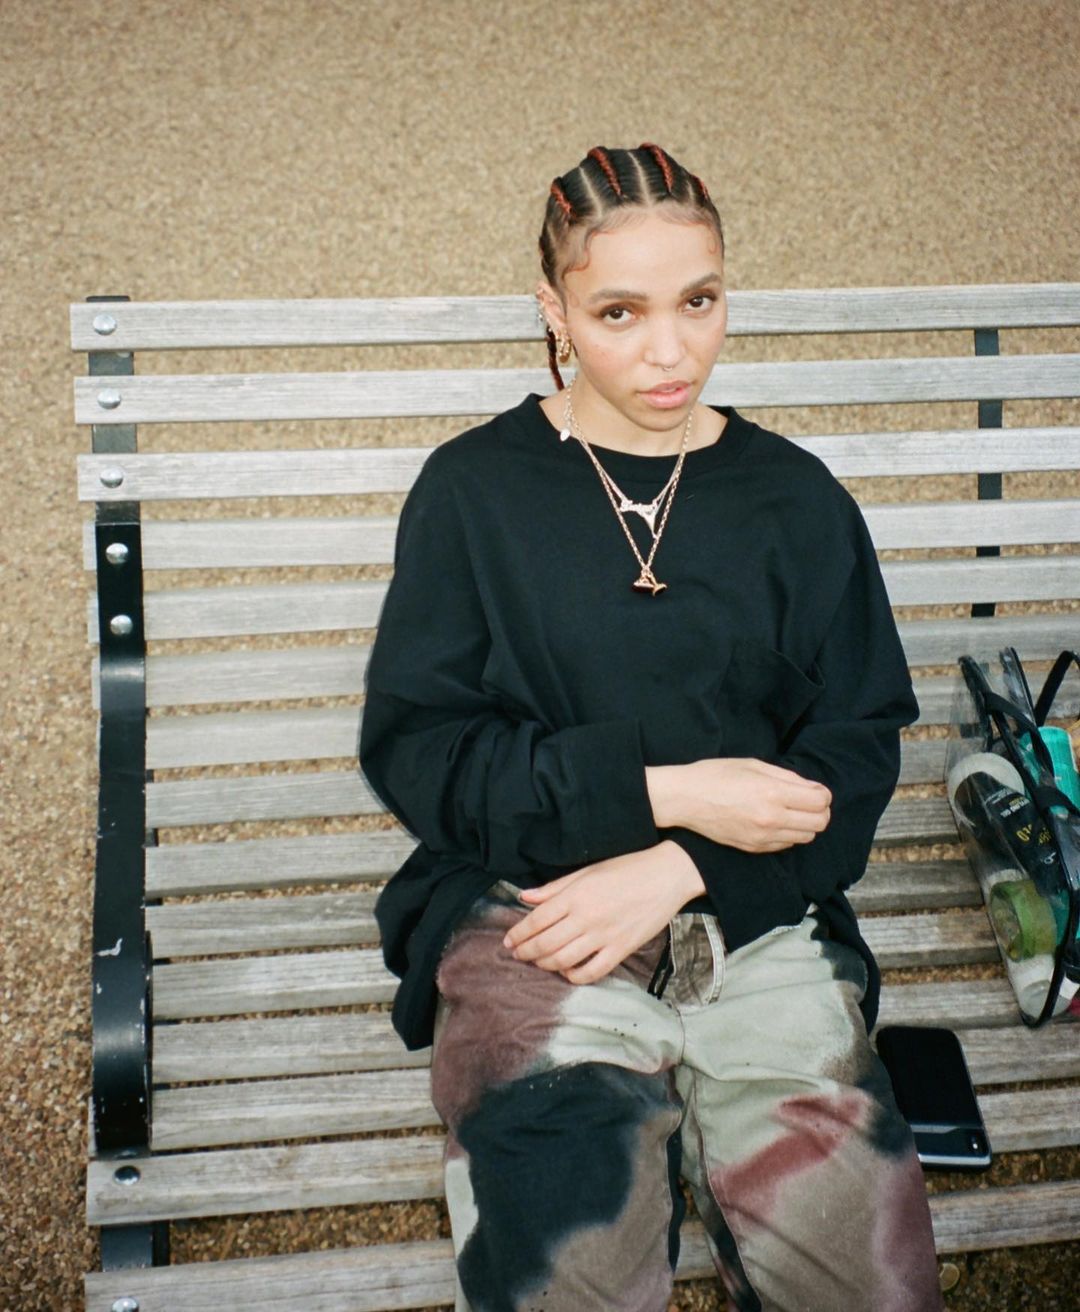 FKA Twigs looks stylish in this patterned pant and black sweatshirt, while sitting on a bench.